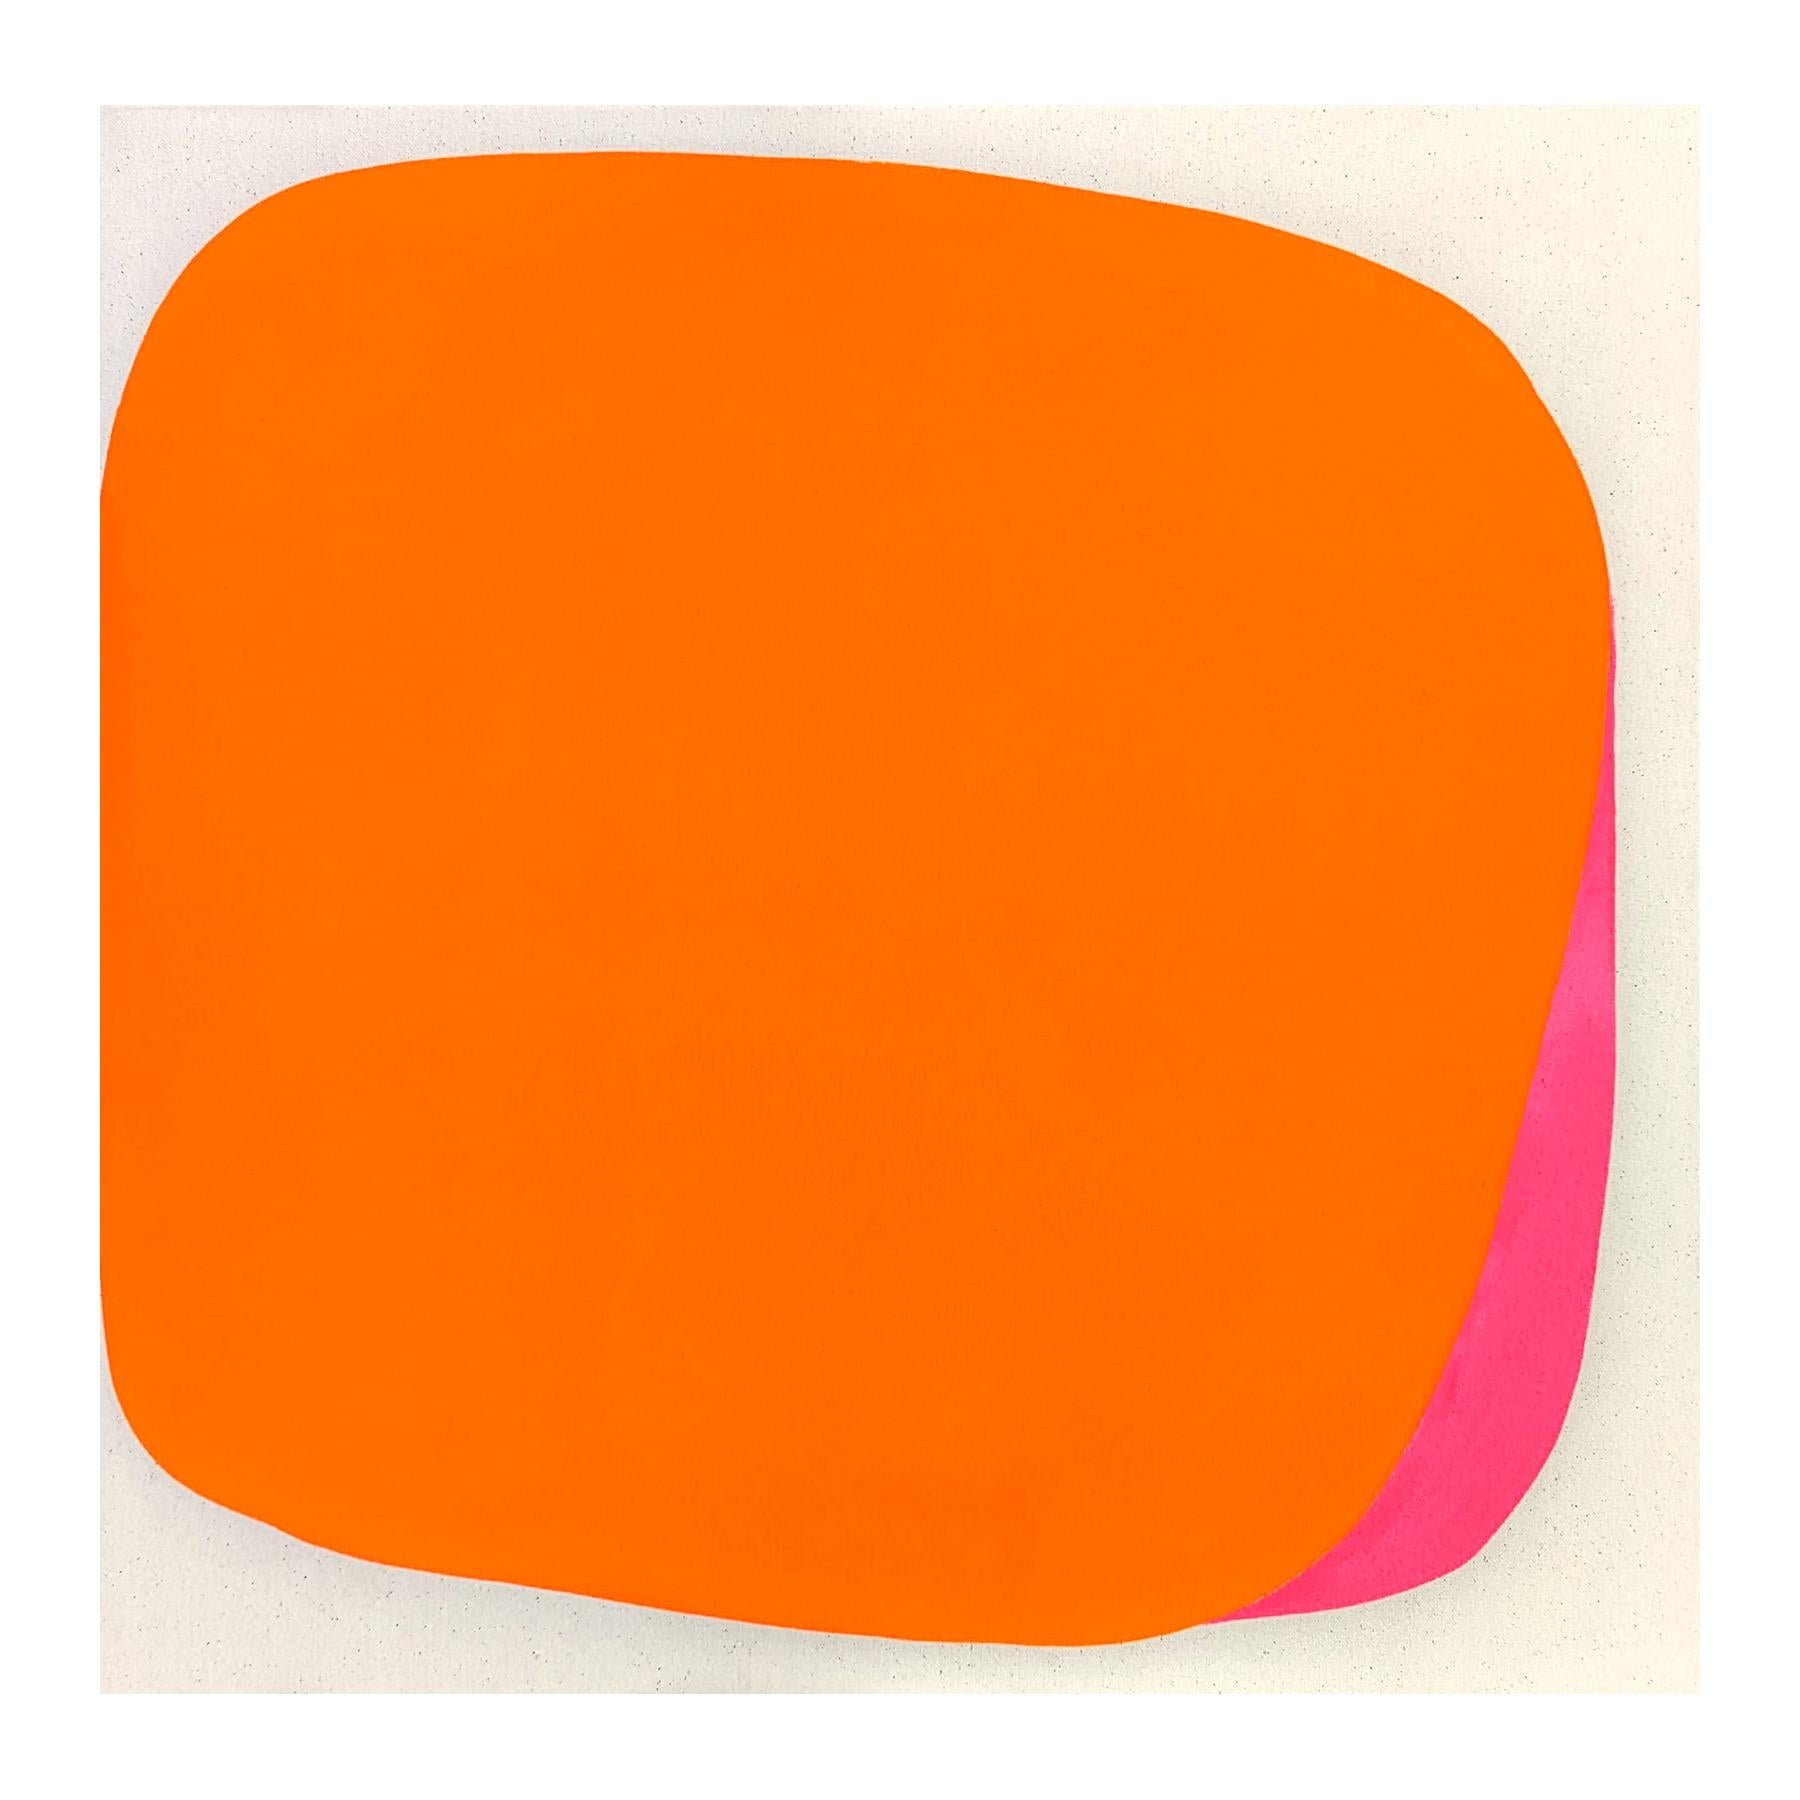 Contemporary abstract painting by Houston-based artist Gary Griffin. The work features a central orange and pink rounded square shape set against an off-white background. Signed, titled, and dated on the reverse. Currently unframed, but options are